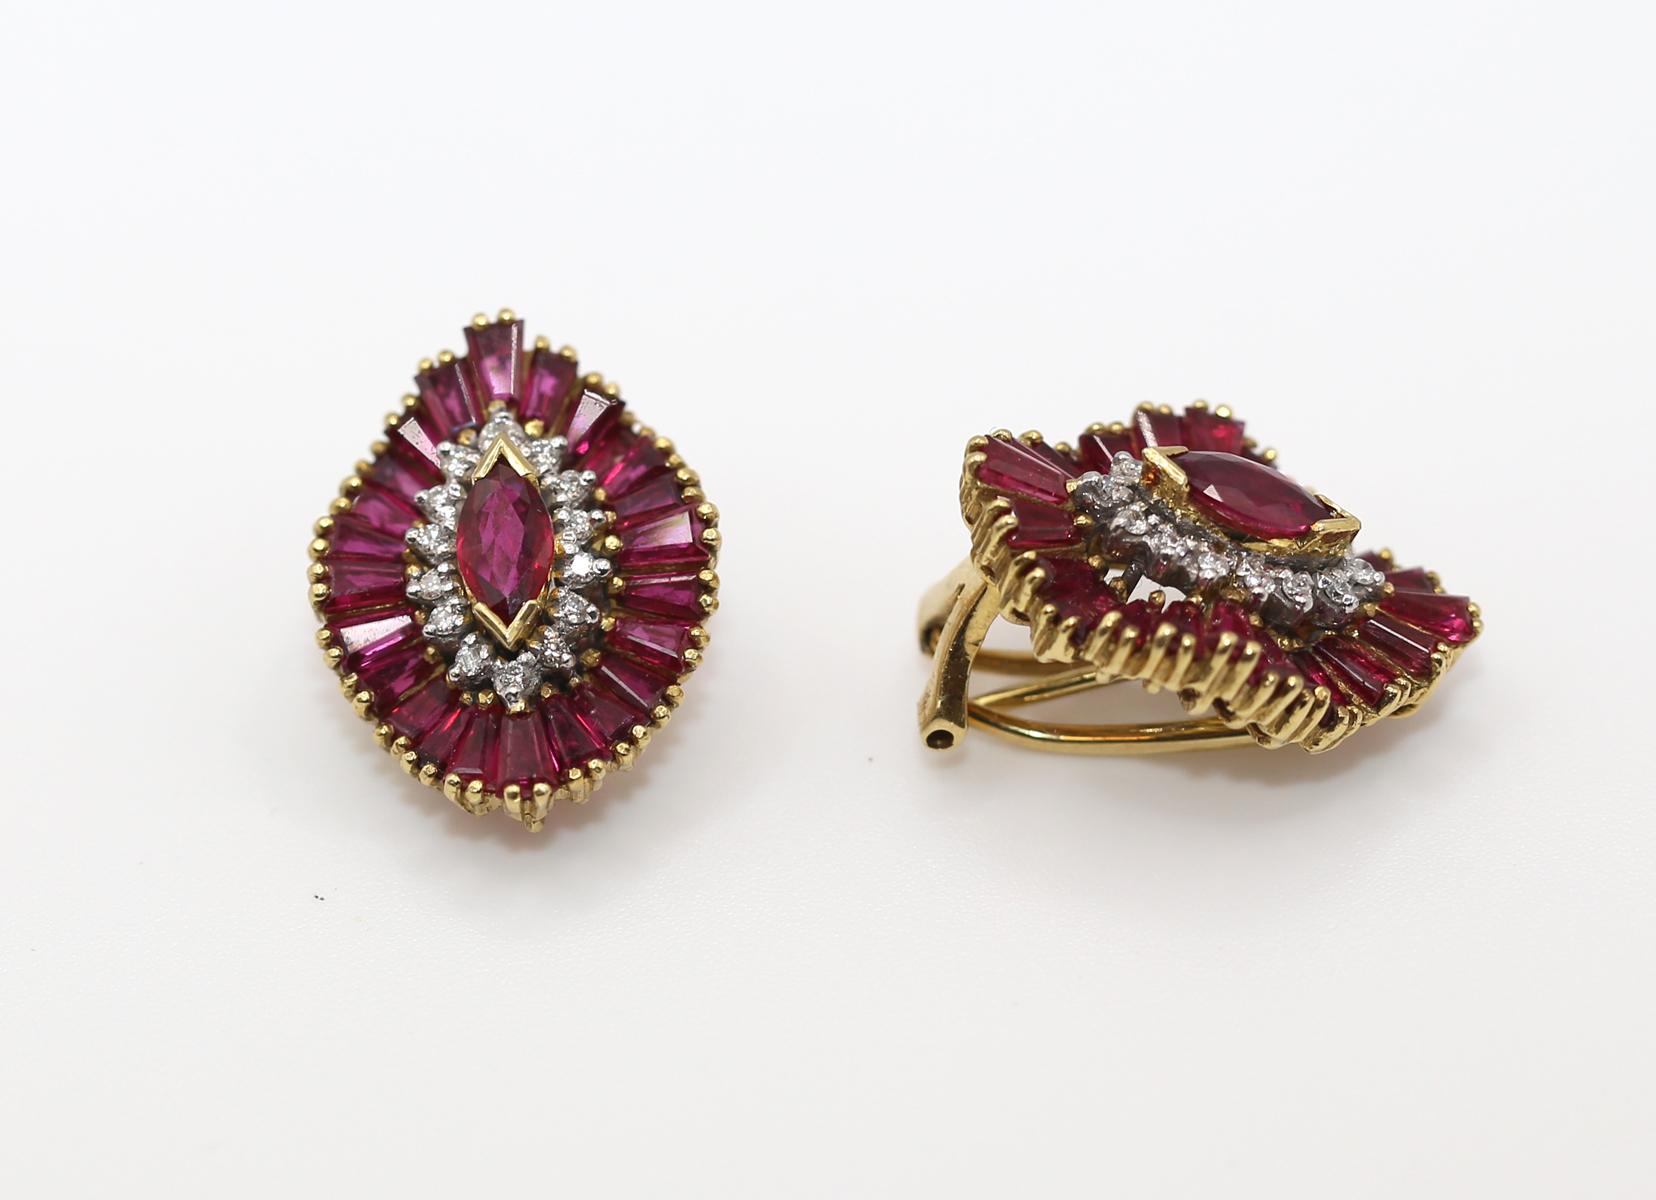 Rubies Diamonds Yellow Gold Earrings. Created around 1970. 18 Karats.

A fine combination of immaculate stones and the exceptional skill of the jeweler. Rubies are set with an “invisible” technique when stones are perfectly matched together without